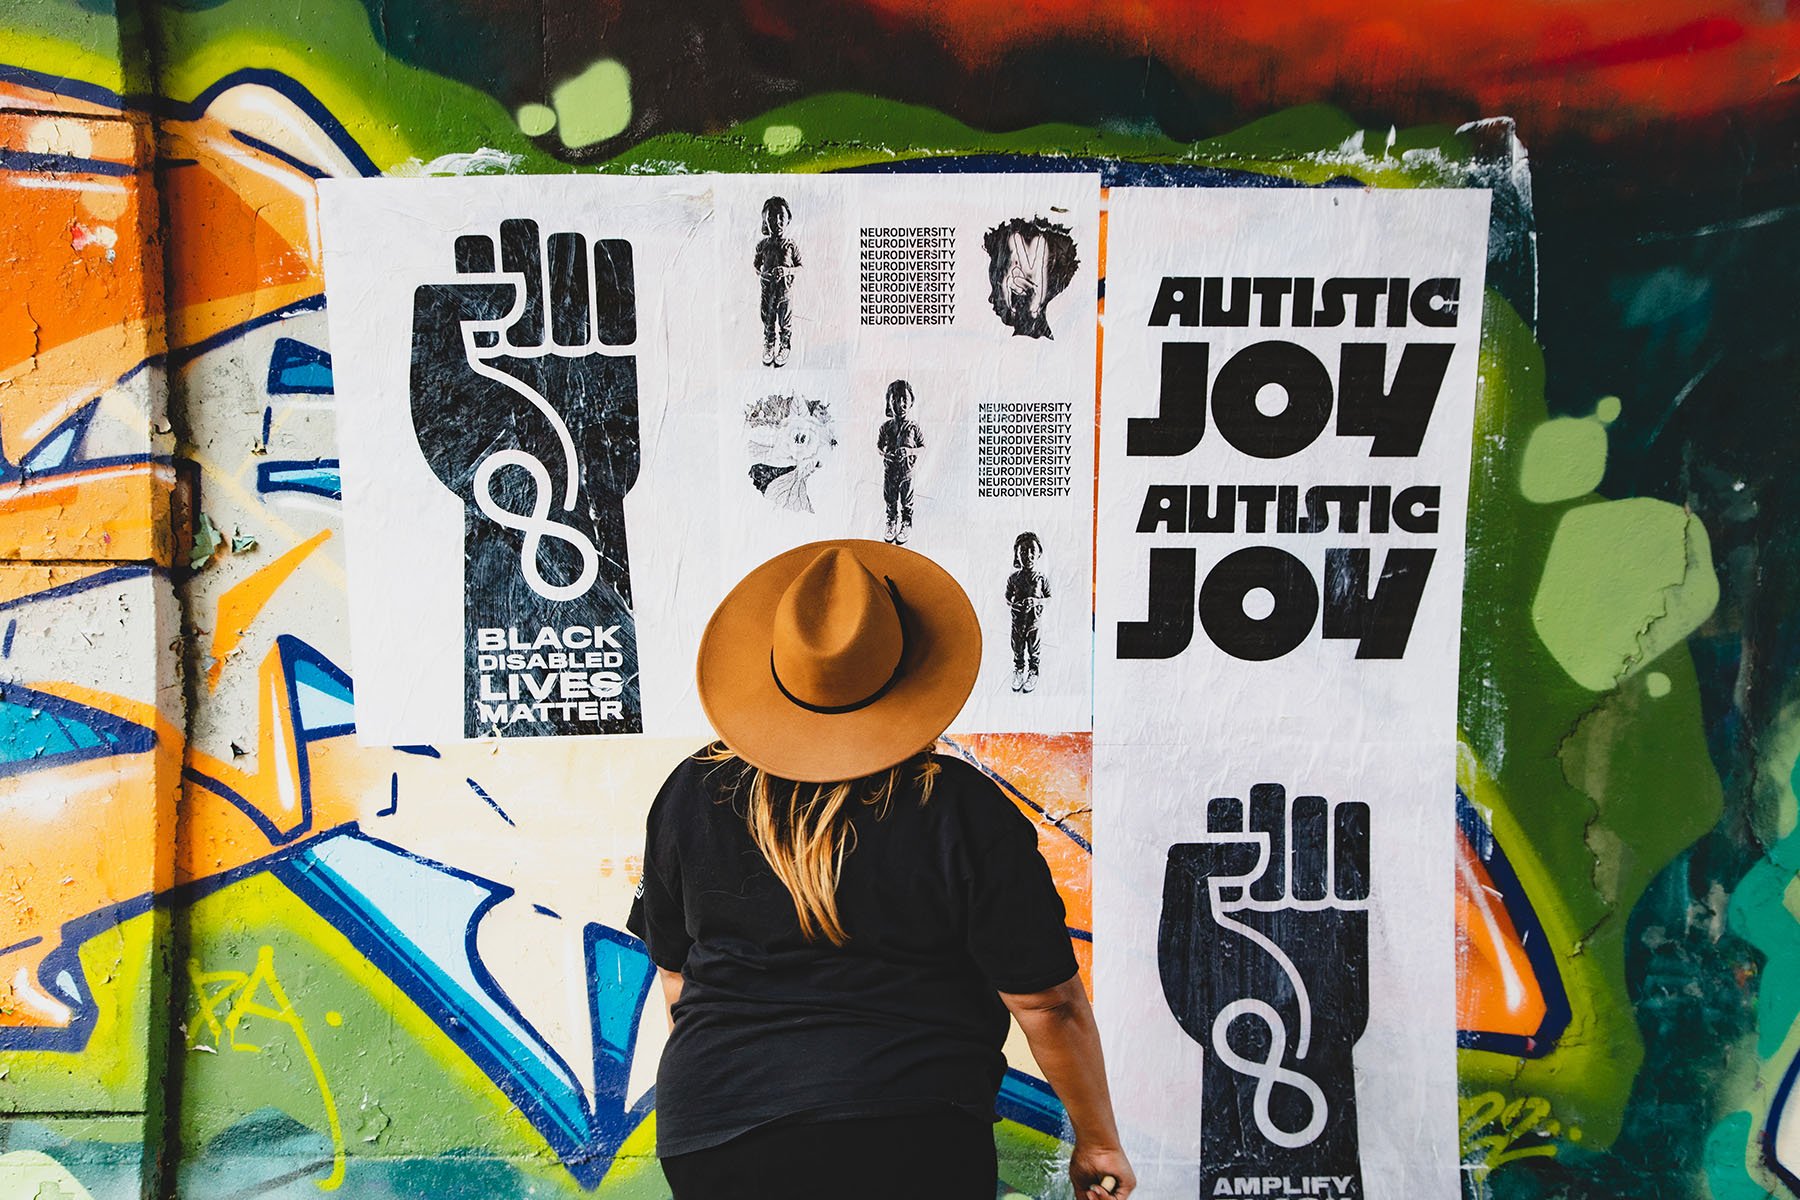 Jen White Johnson looks at wheat pastes she designed that read "autistic joy," "black disabled lives matter," and the word "neurodiversity" repeated throughout a poster.